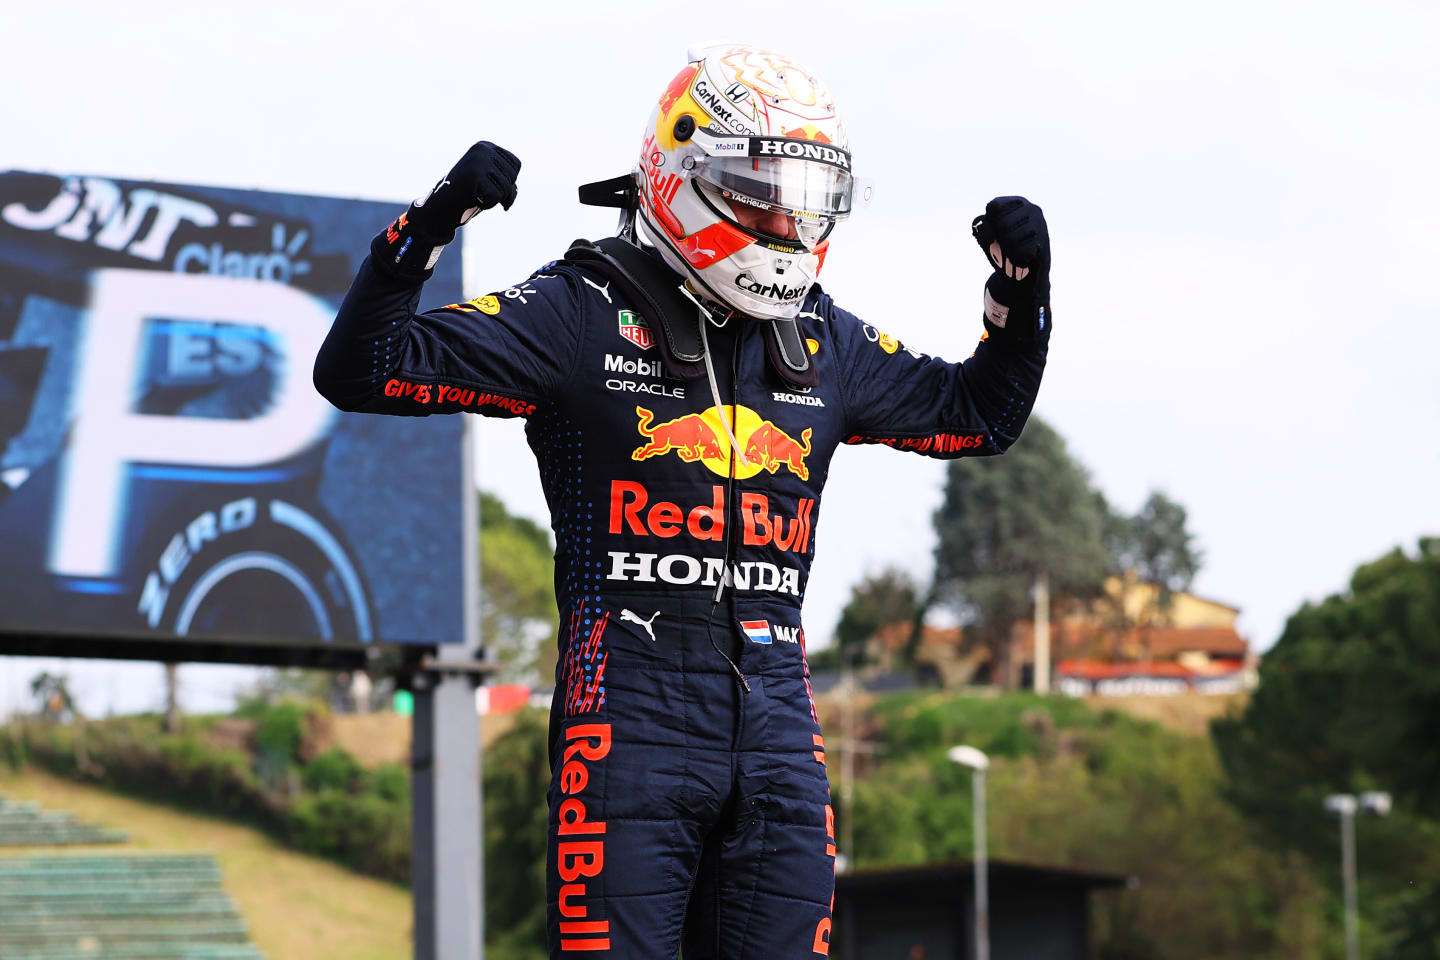 IMOLA, ITALY - APRIL 18: Race winner Max Verstappen of Netherlands and Red Bull Racing celebrates